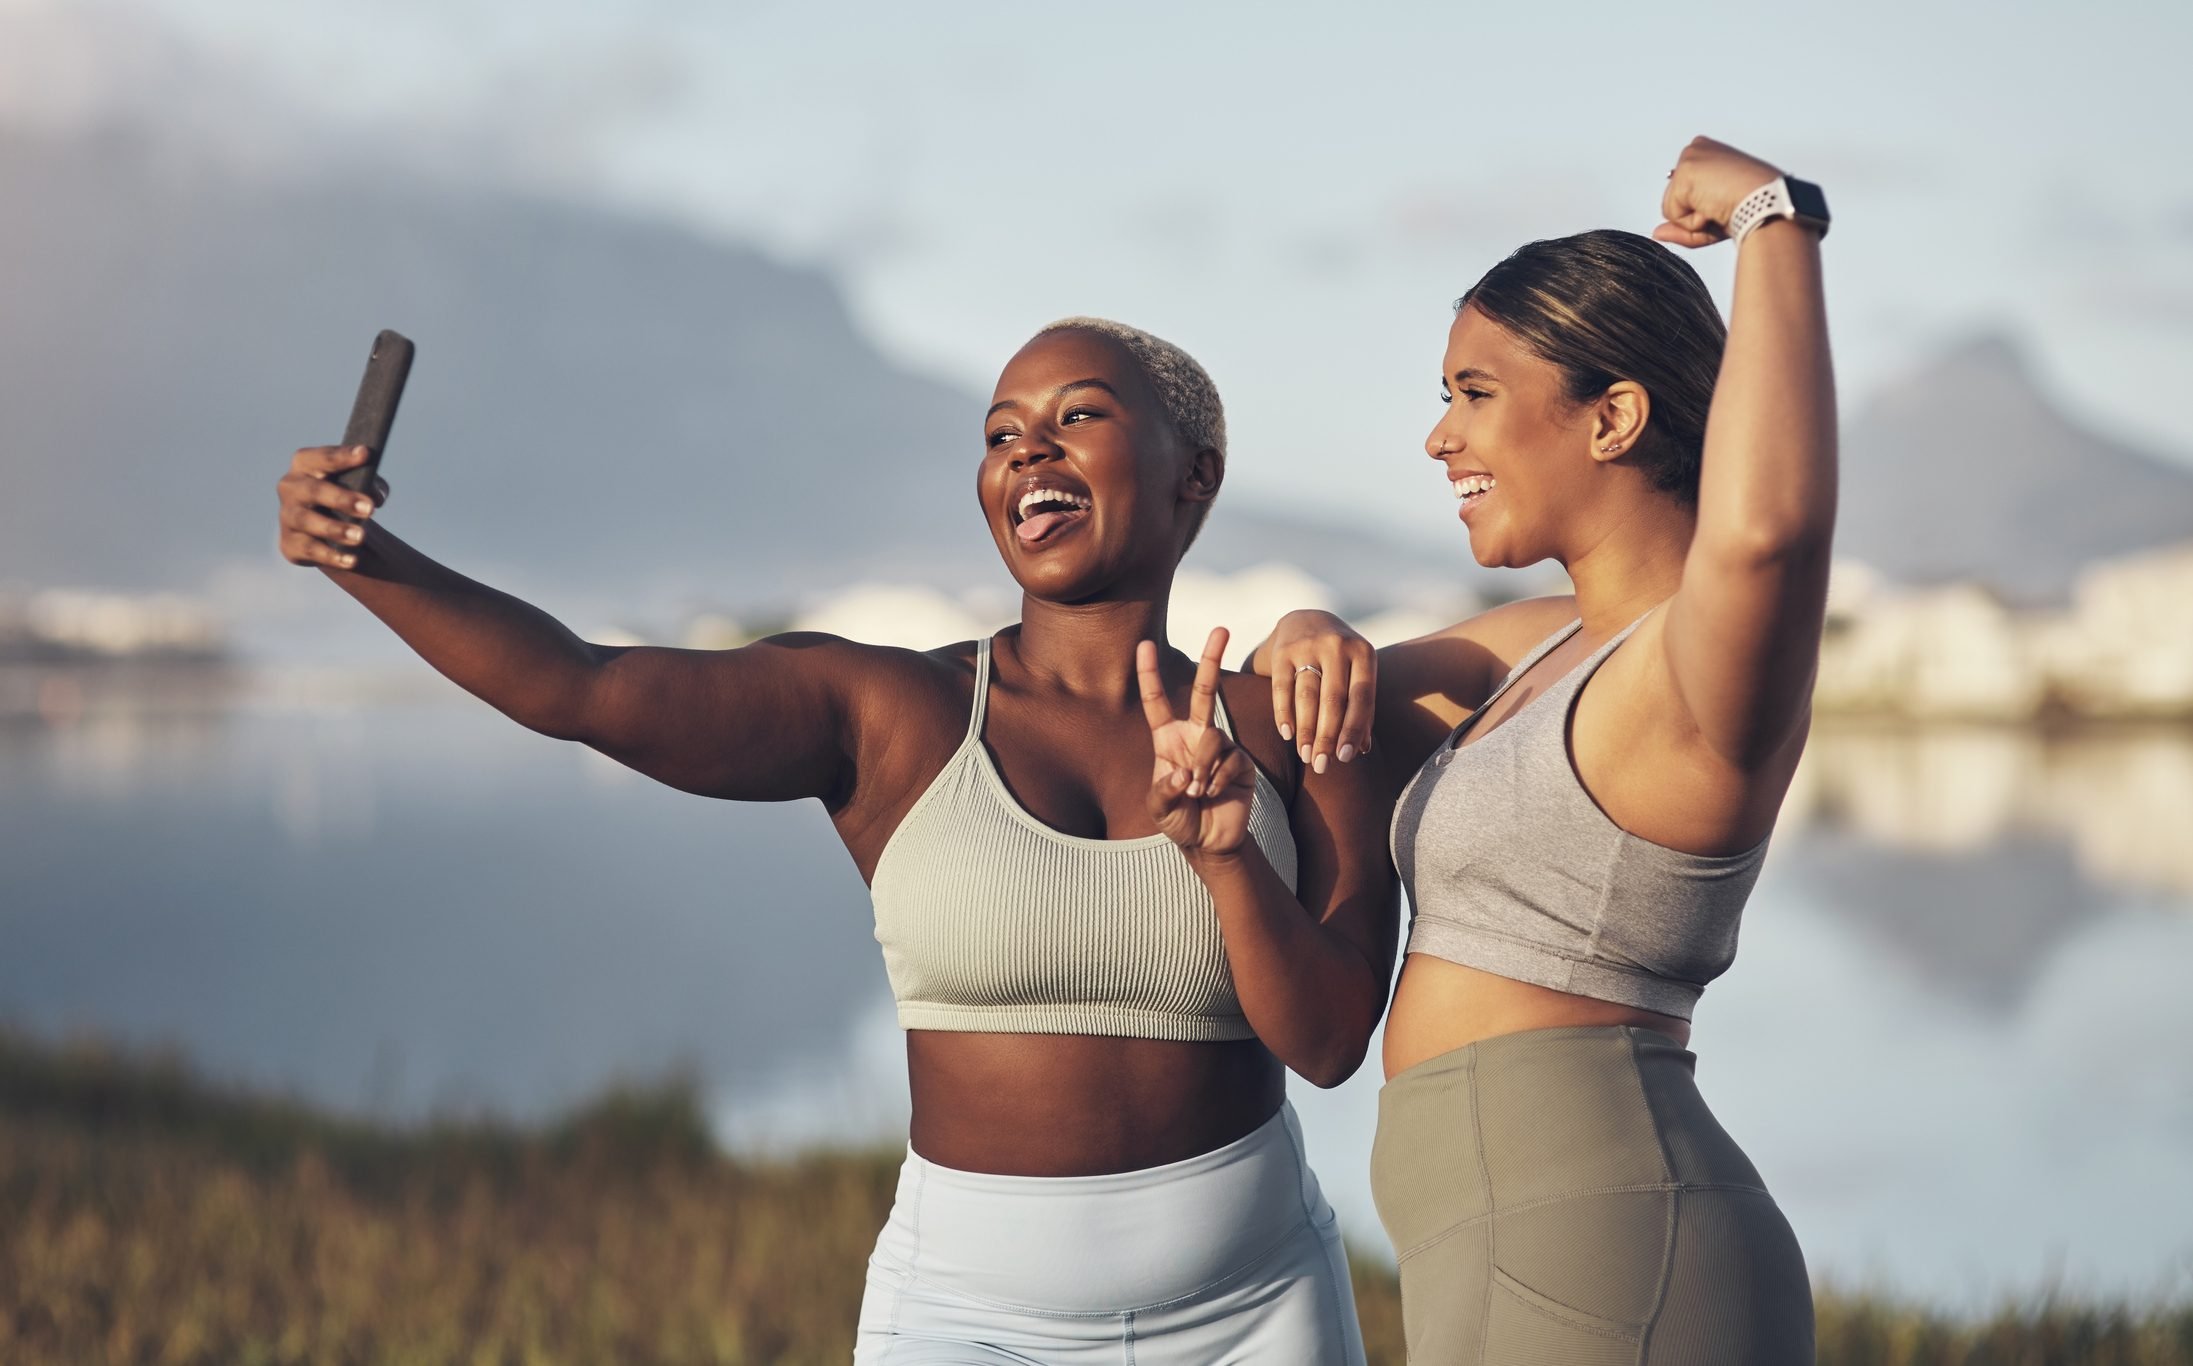 Research Says This One Goal Will Motivate You to Exercise—and It's Not Weight Loss